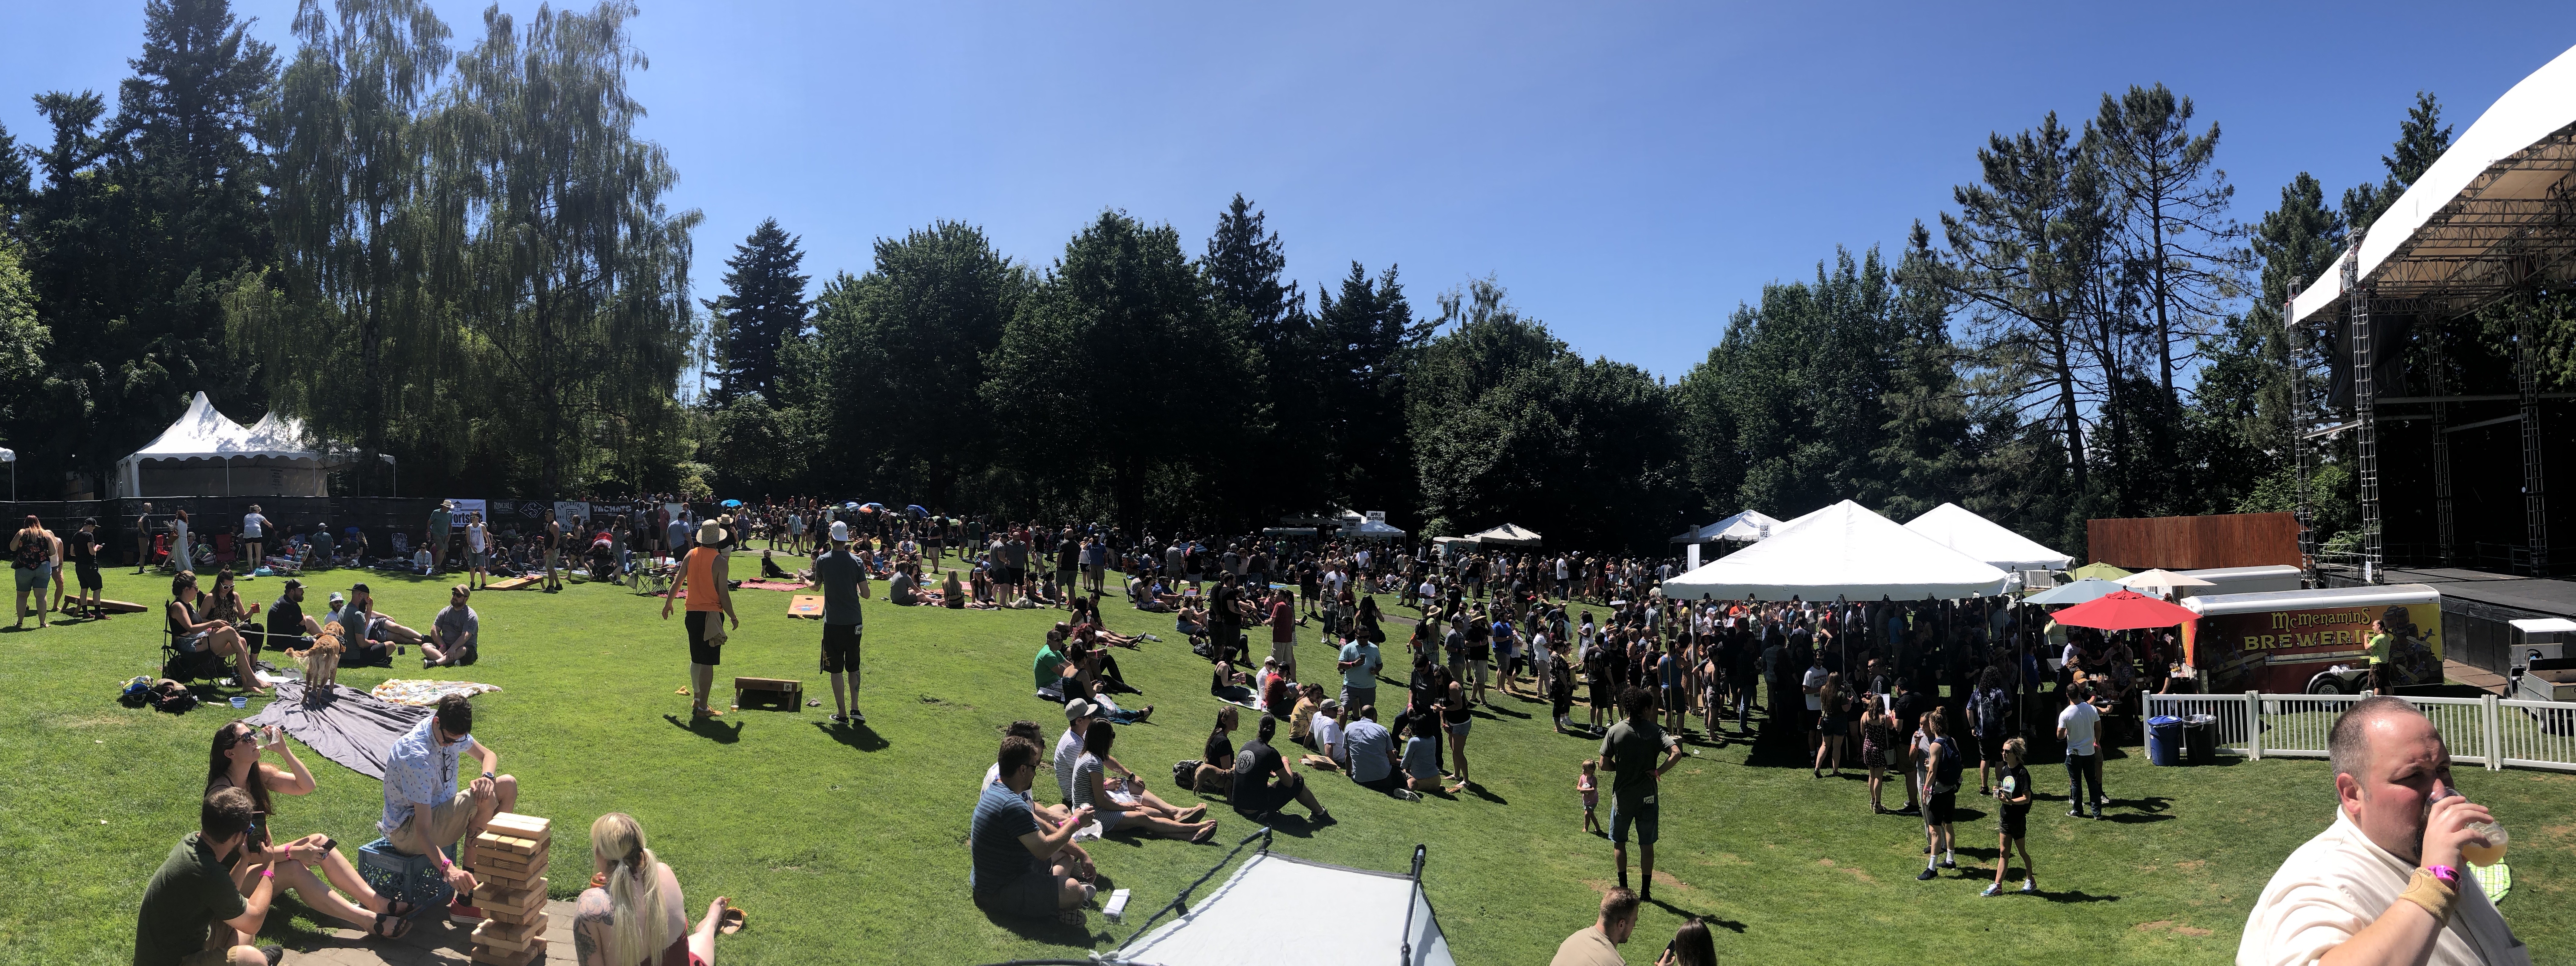 The 2019 edition of the Edgefield Brewfest.